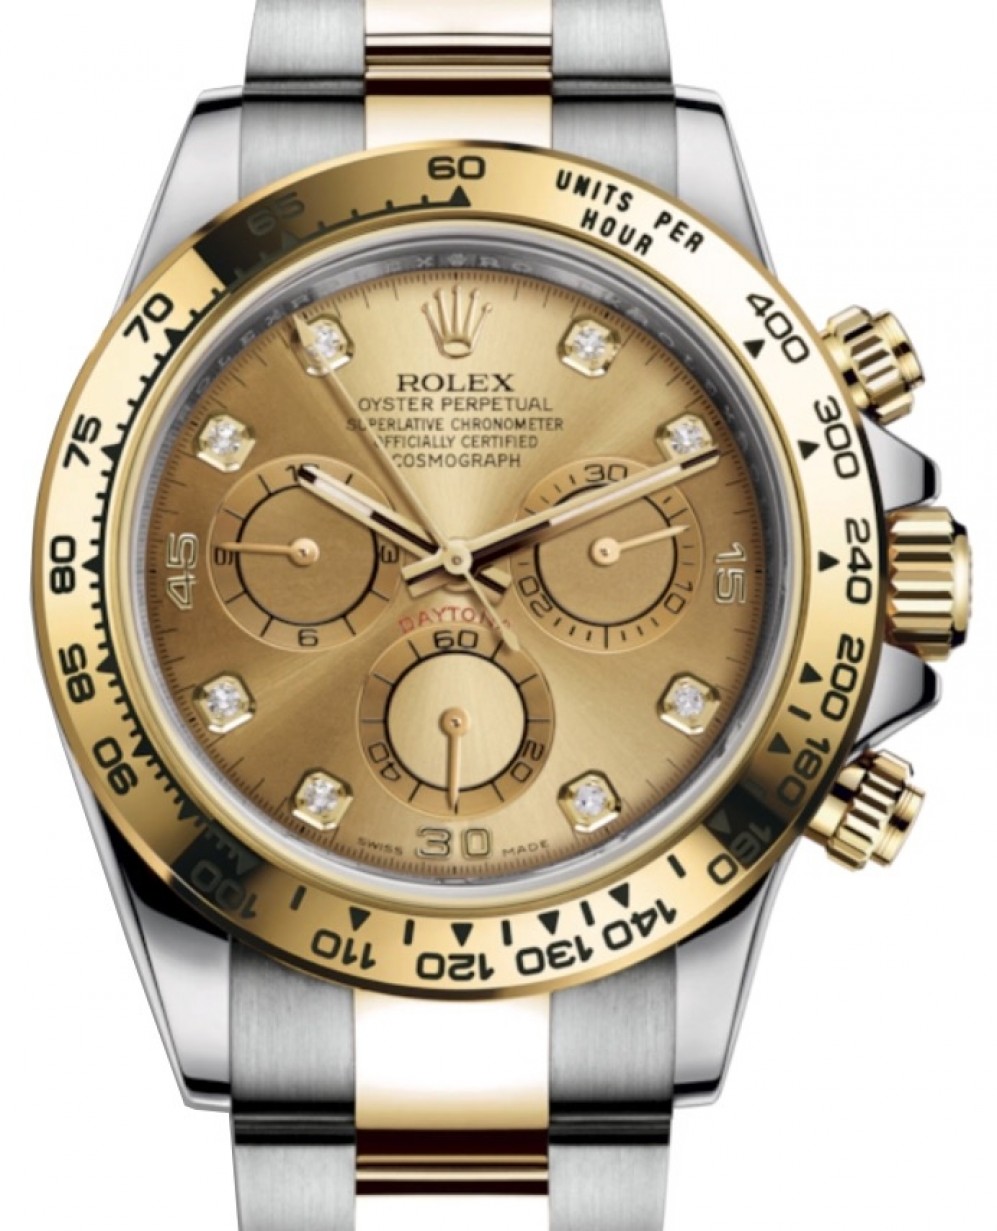 Rolex Cosmograph Daytona 116503 Champagne Diamond Tachymetre Yellow Gold  Stainless Steel Oyster BRAND NEW